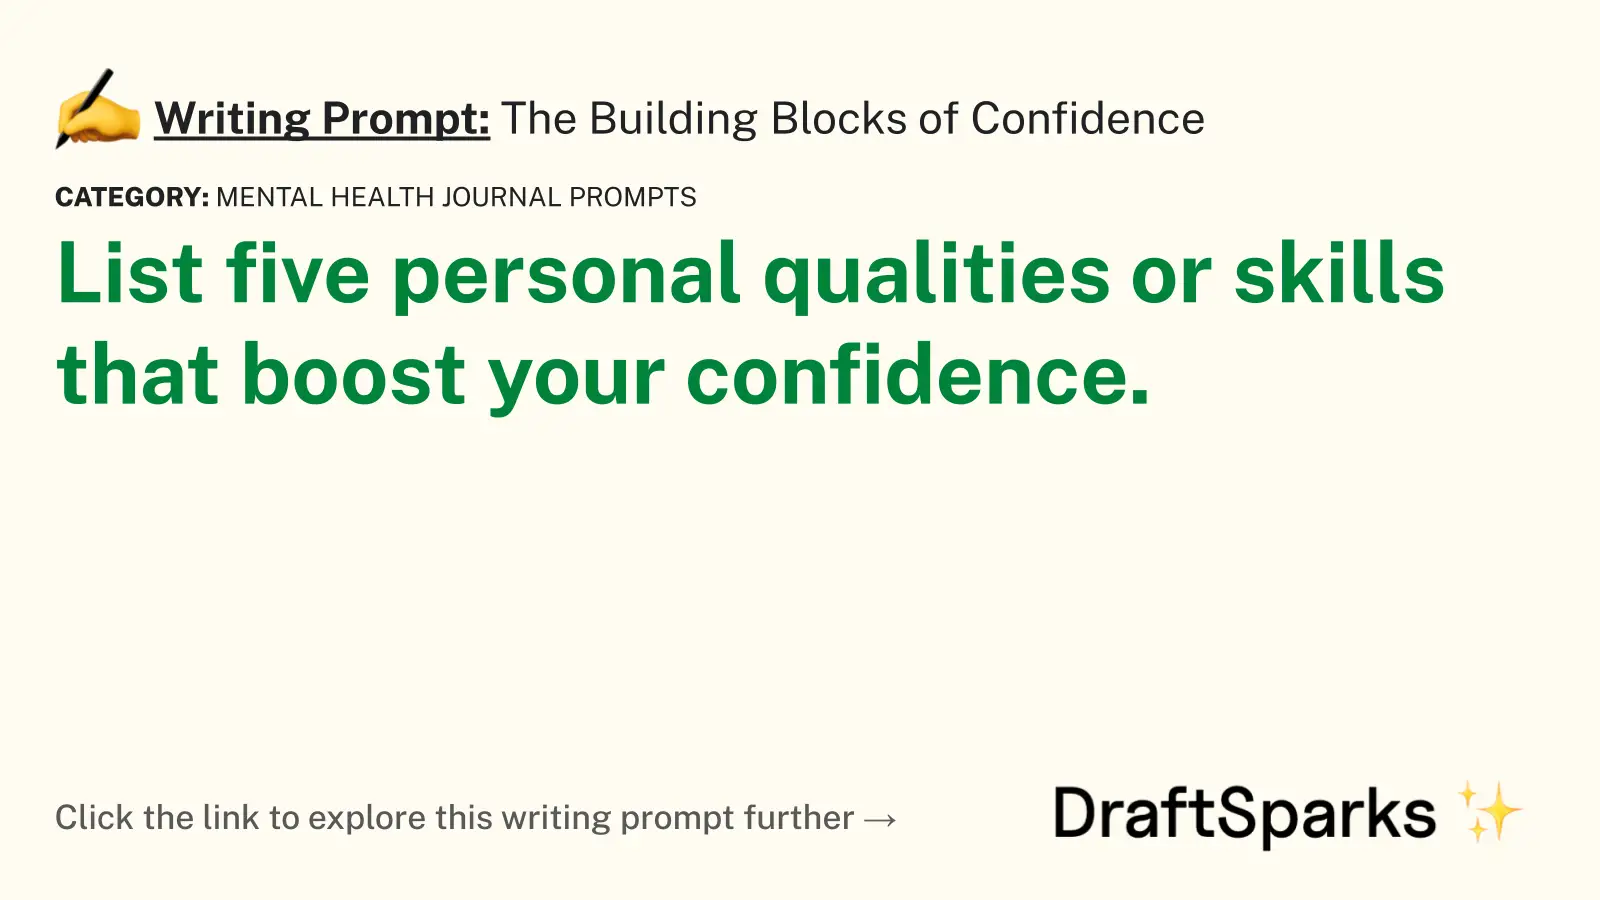 The Building Blocks of Confidence